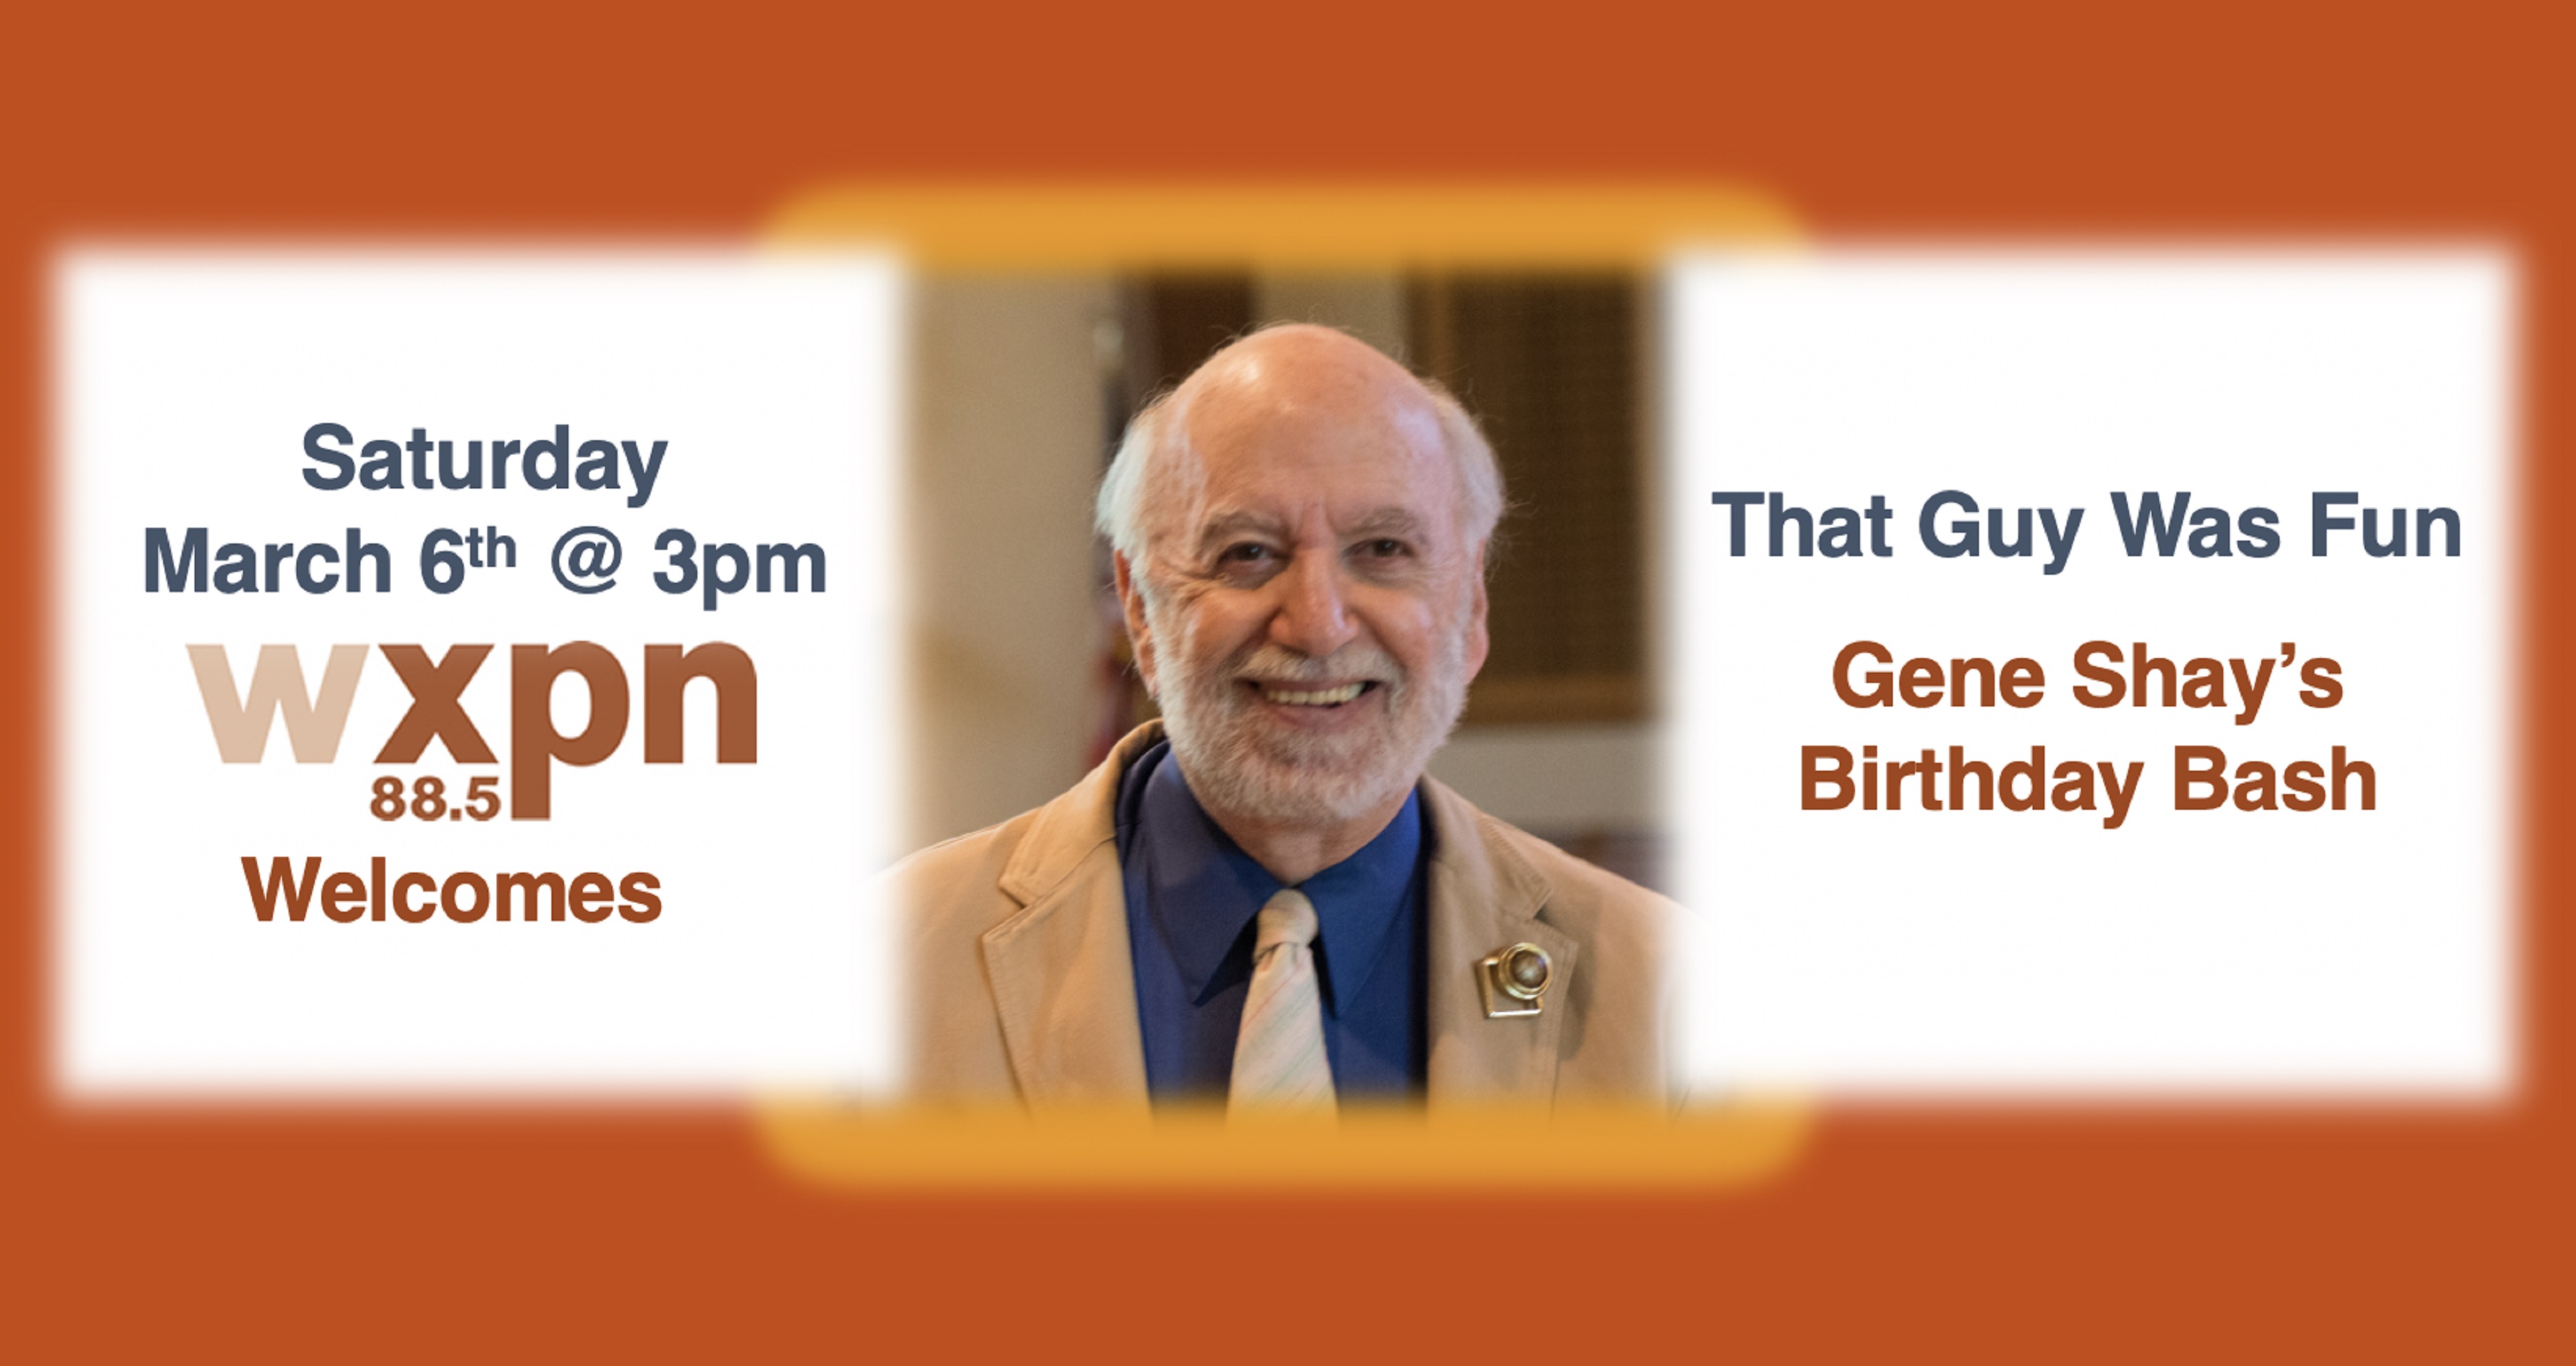 WXPN Welcomes That Guy Was Fun Gene Shay's Birthday Bash